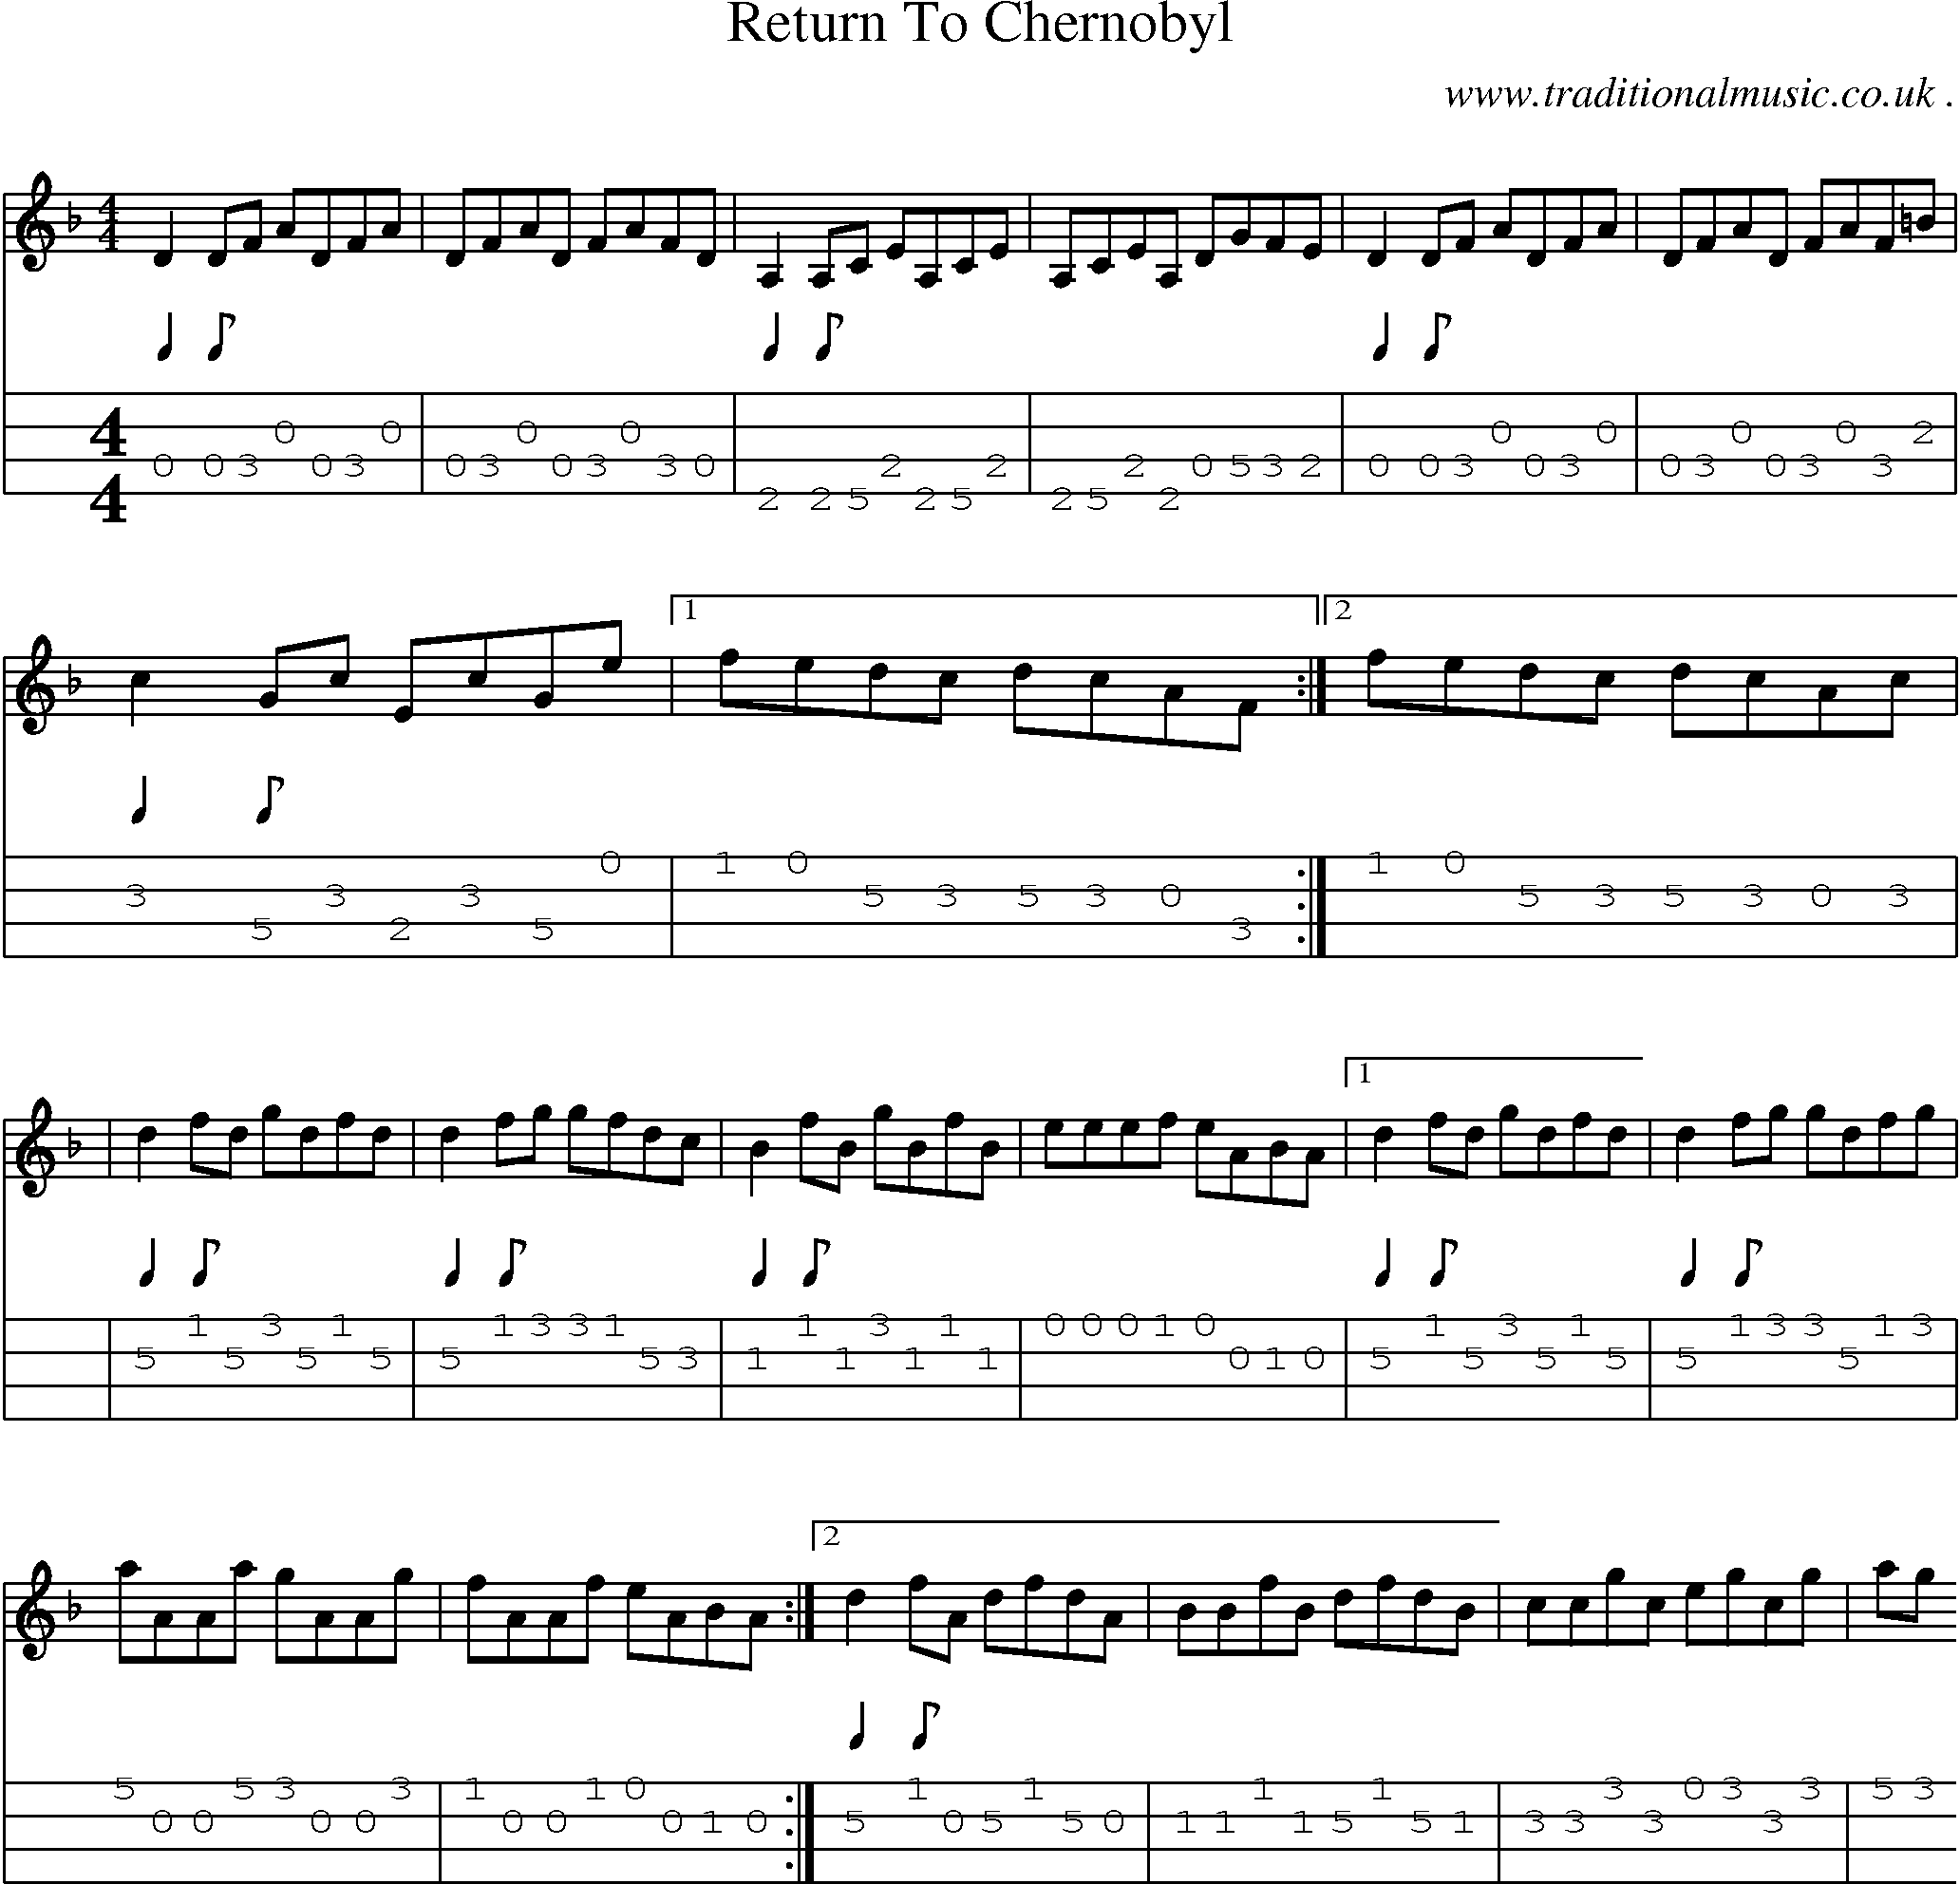 Sheet-Music and Mandolin Tabs for Return To Chernobyl